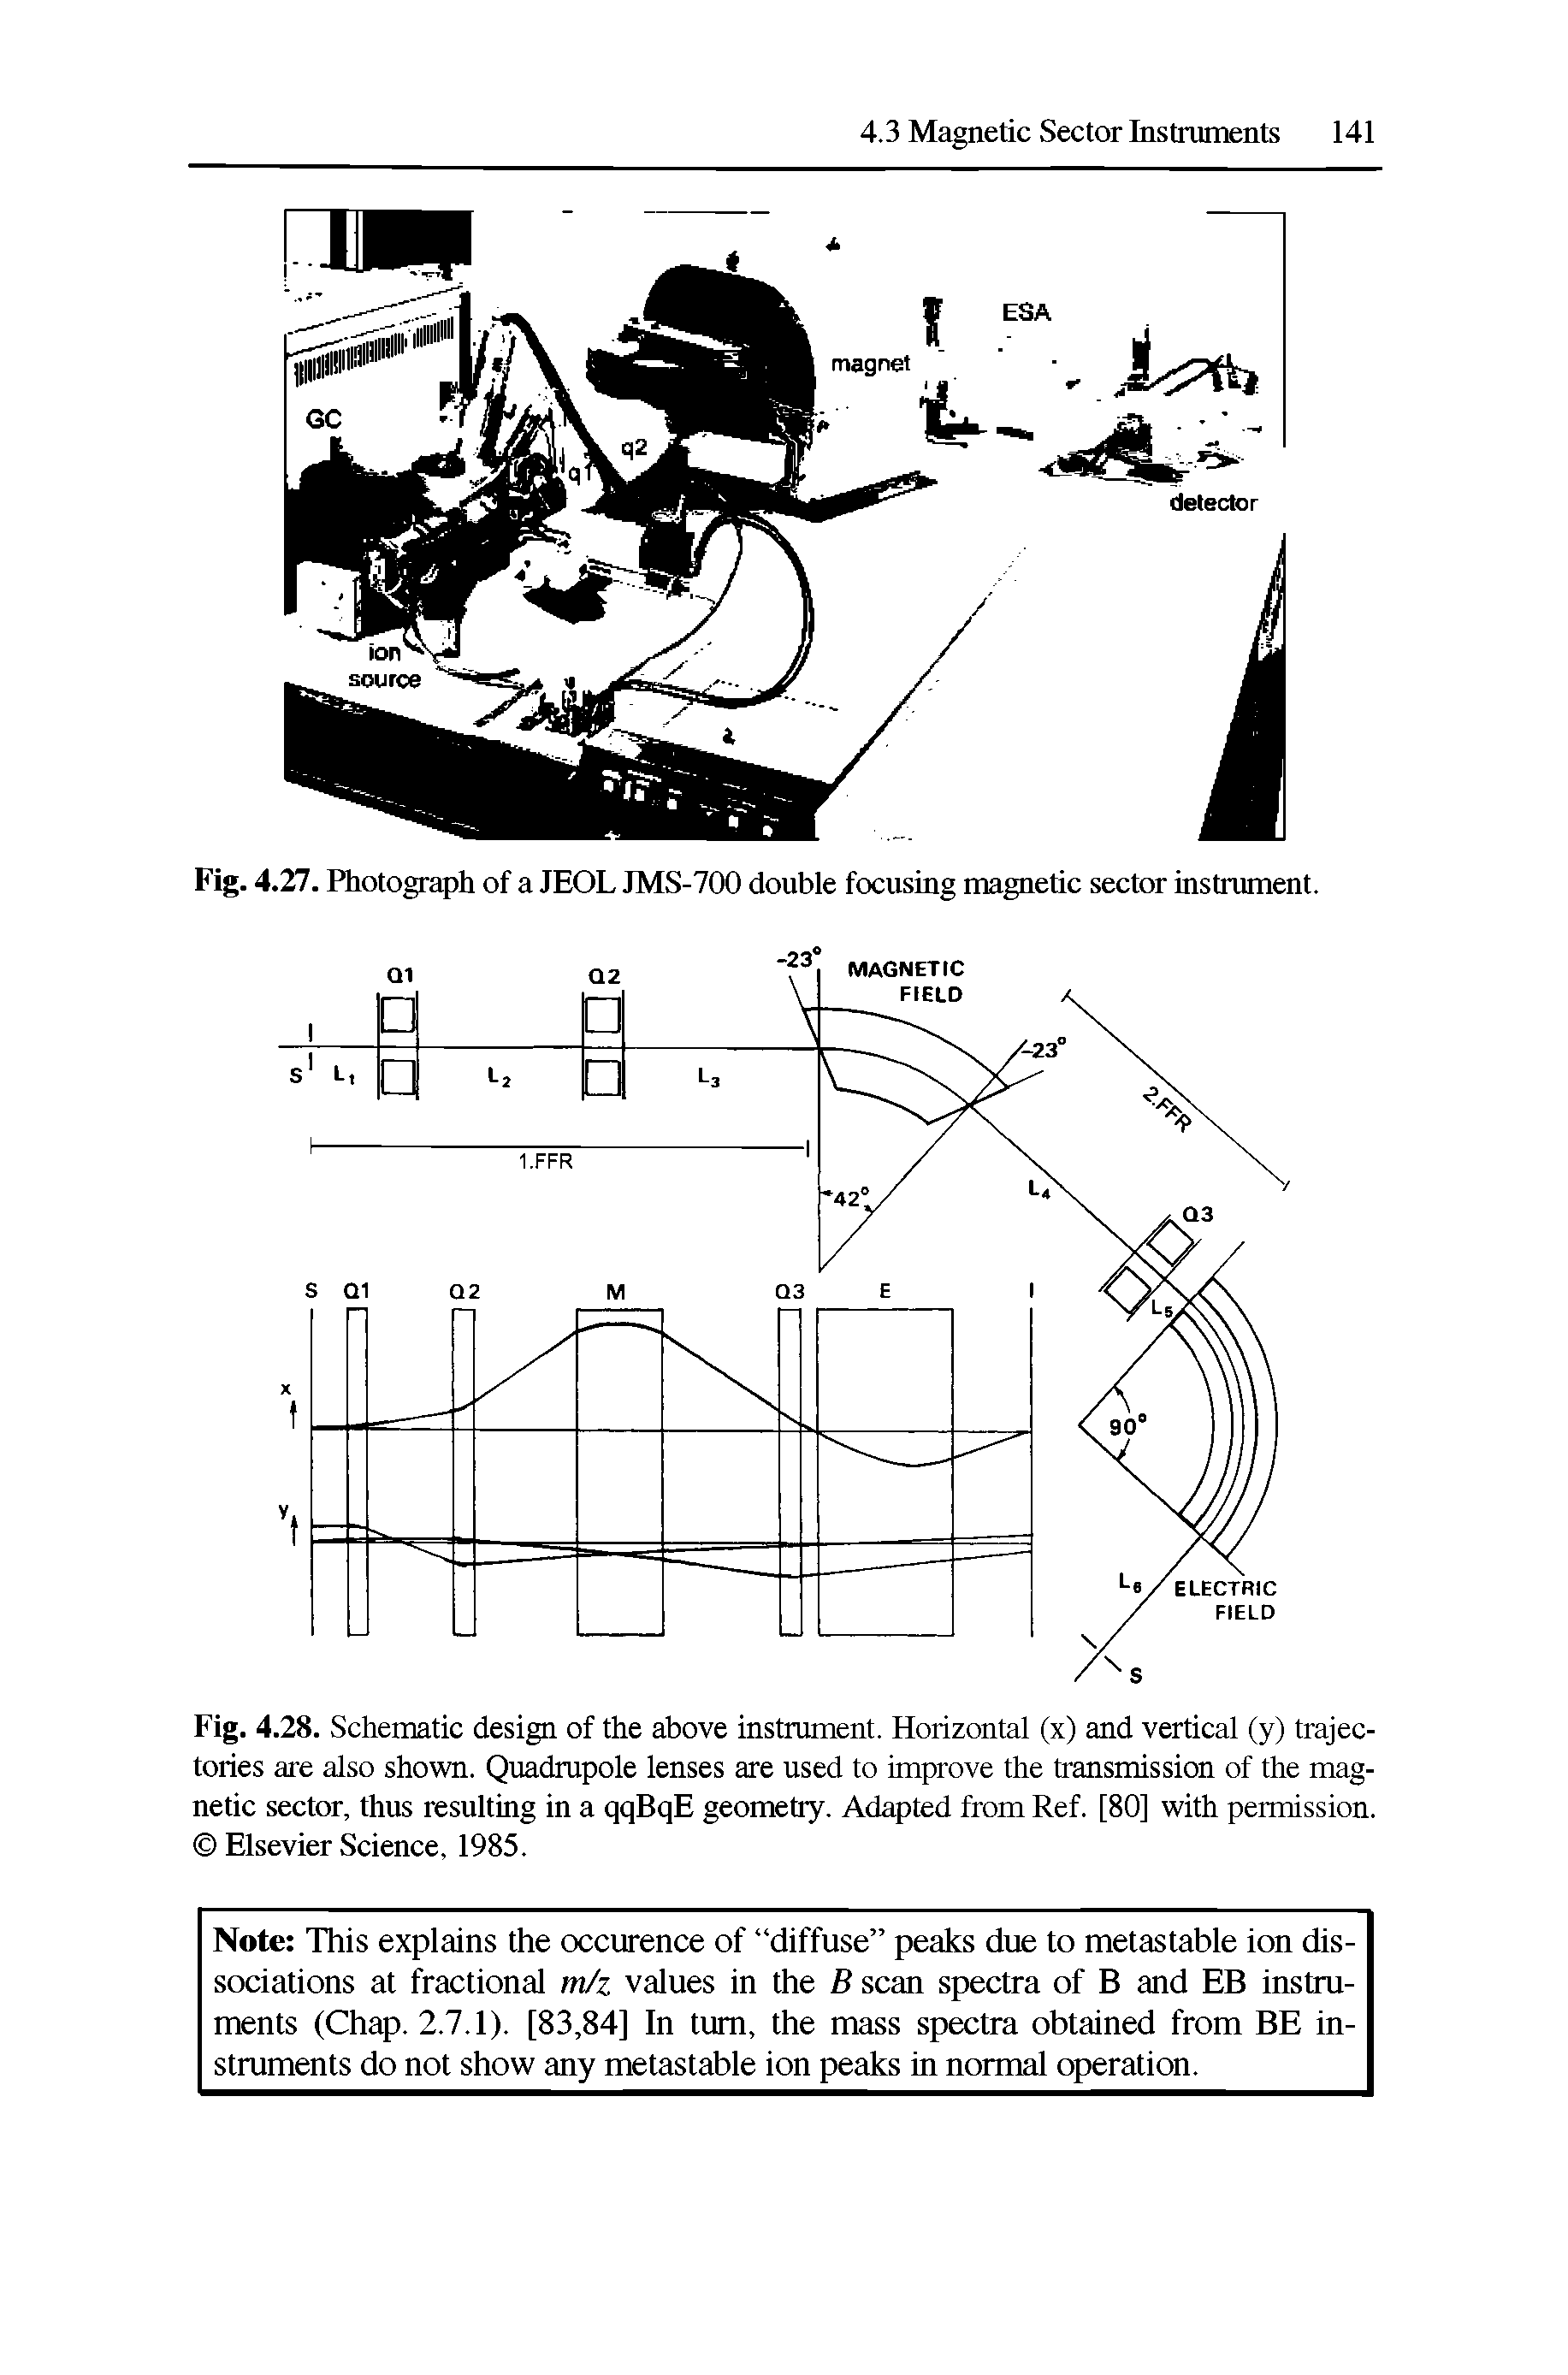 Fig. 4.27. Photograph of a JEOL JMS-700 double focusing magnetic sector instrument.